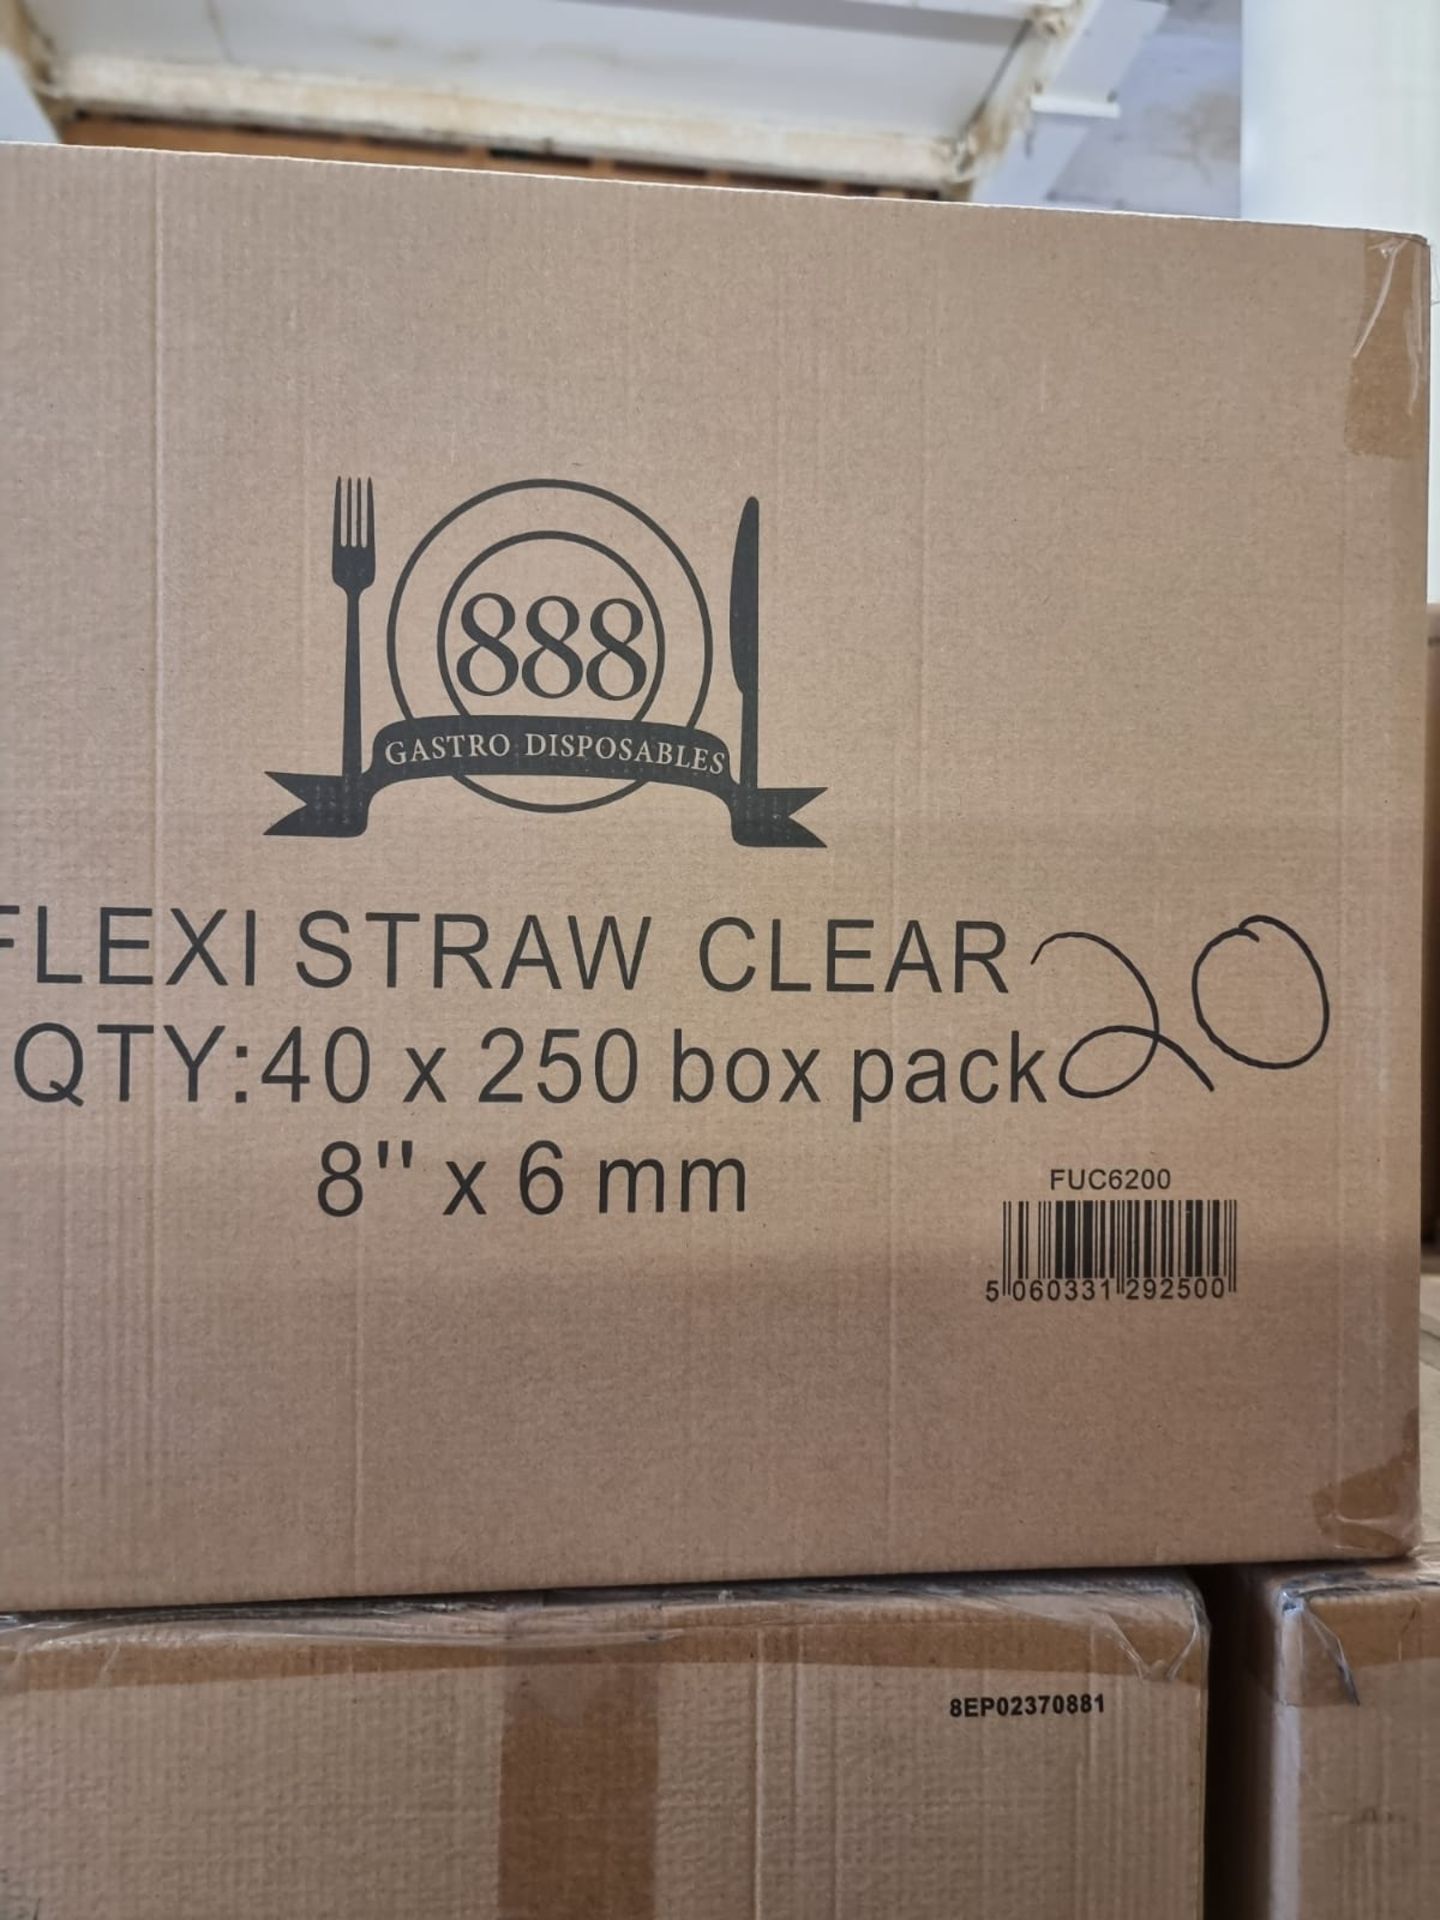 Approx 200,000 x 888 Disposables Flexi Straw | Clear - Image 5 of 5